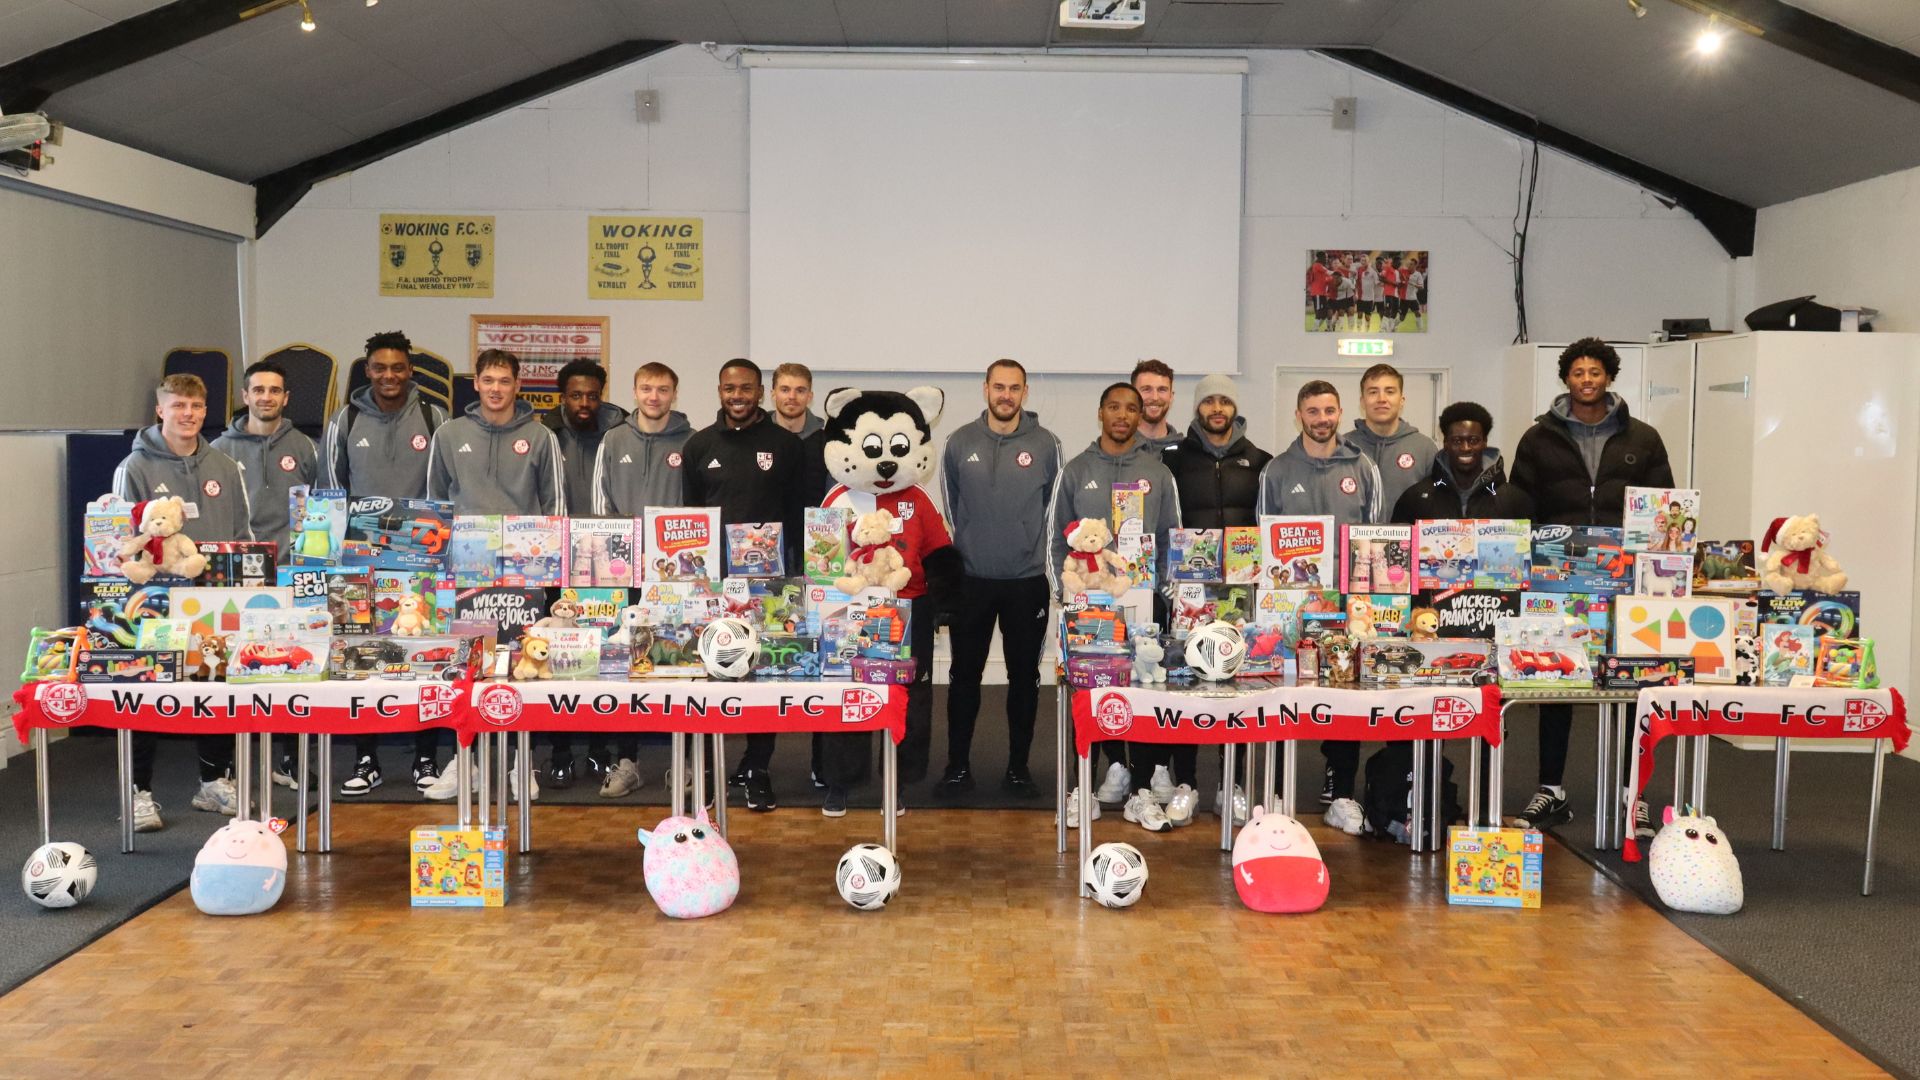 The players delivered presents to two local hospitals